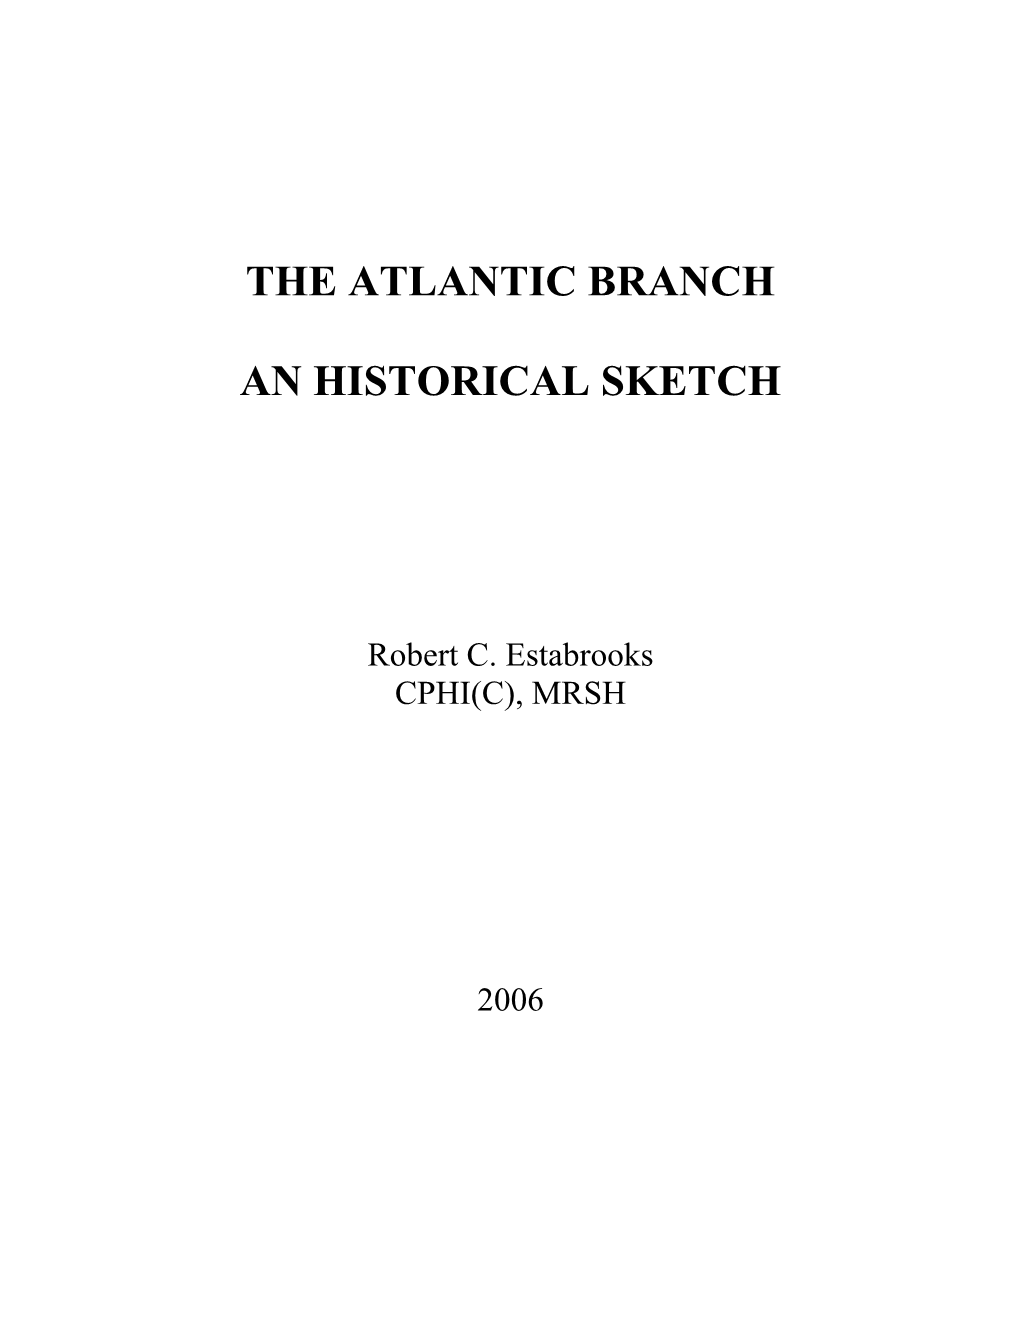 The Atlantic Branch an Historical Sketch